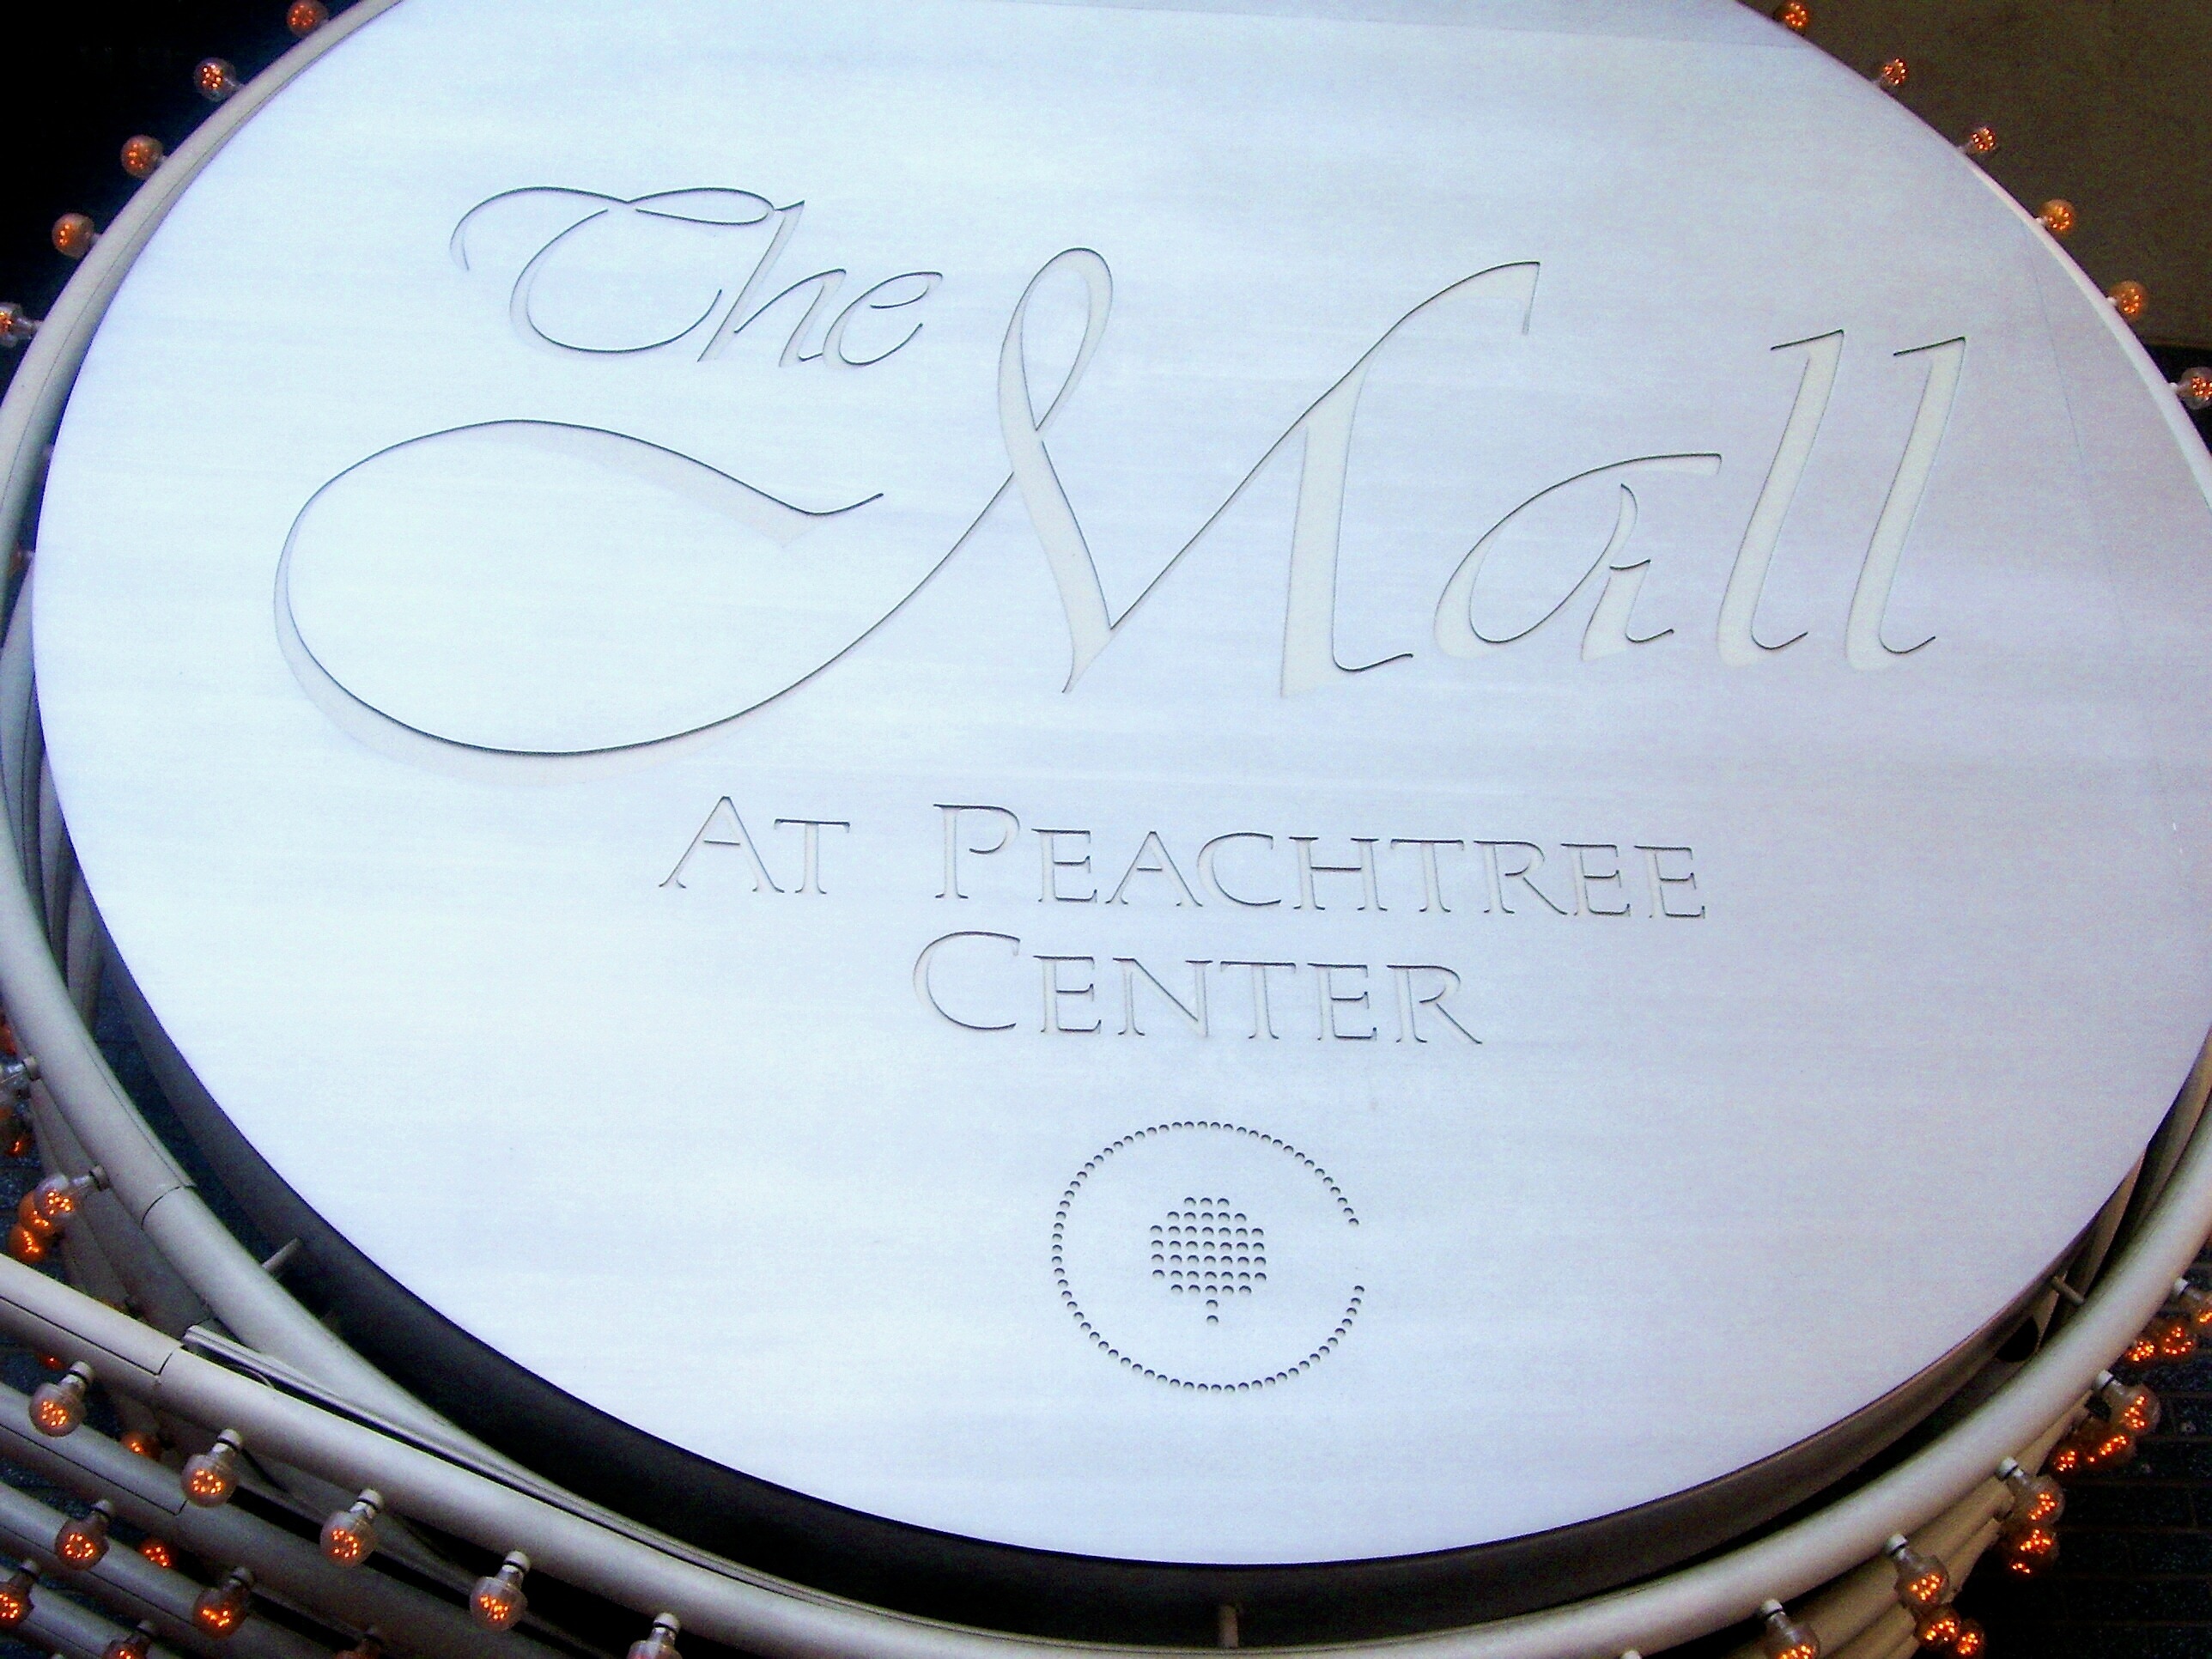 the mall at peachtree center sign